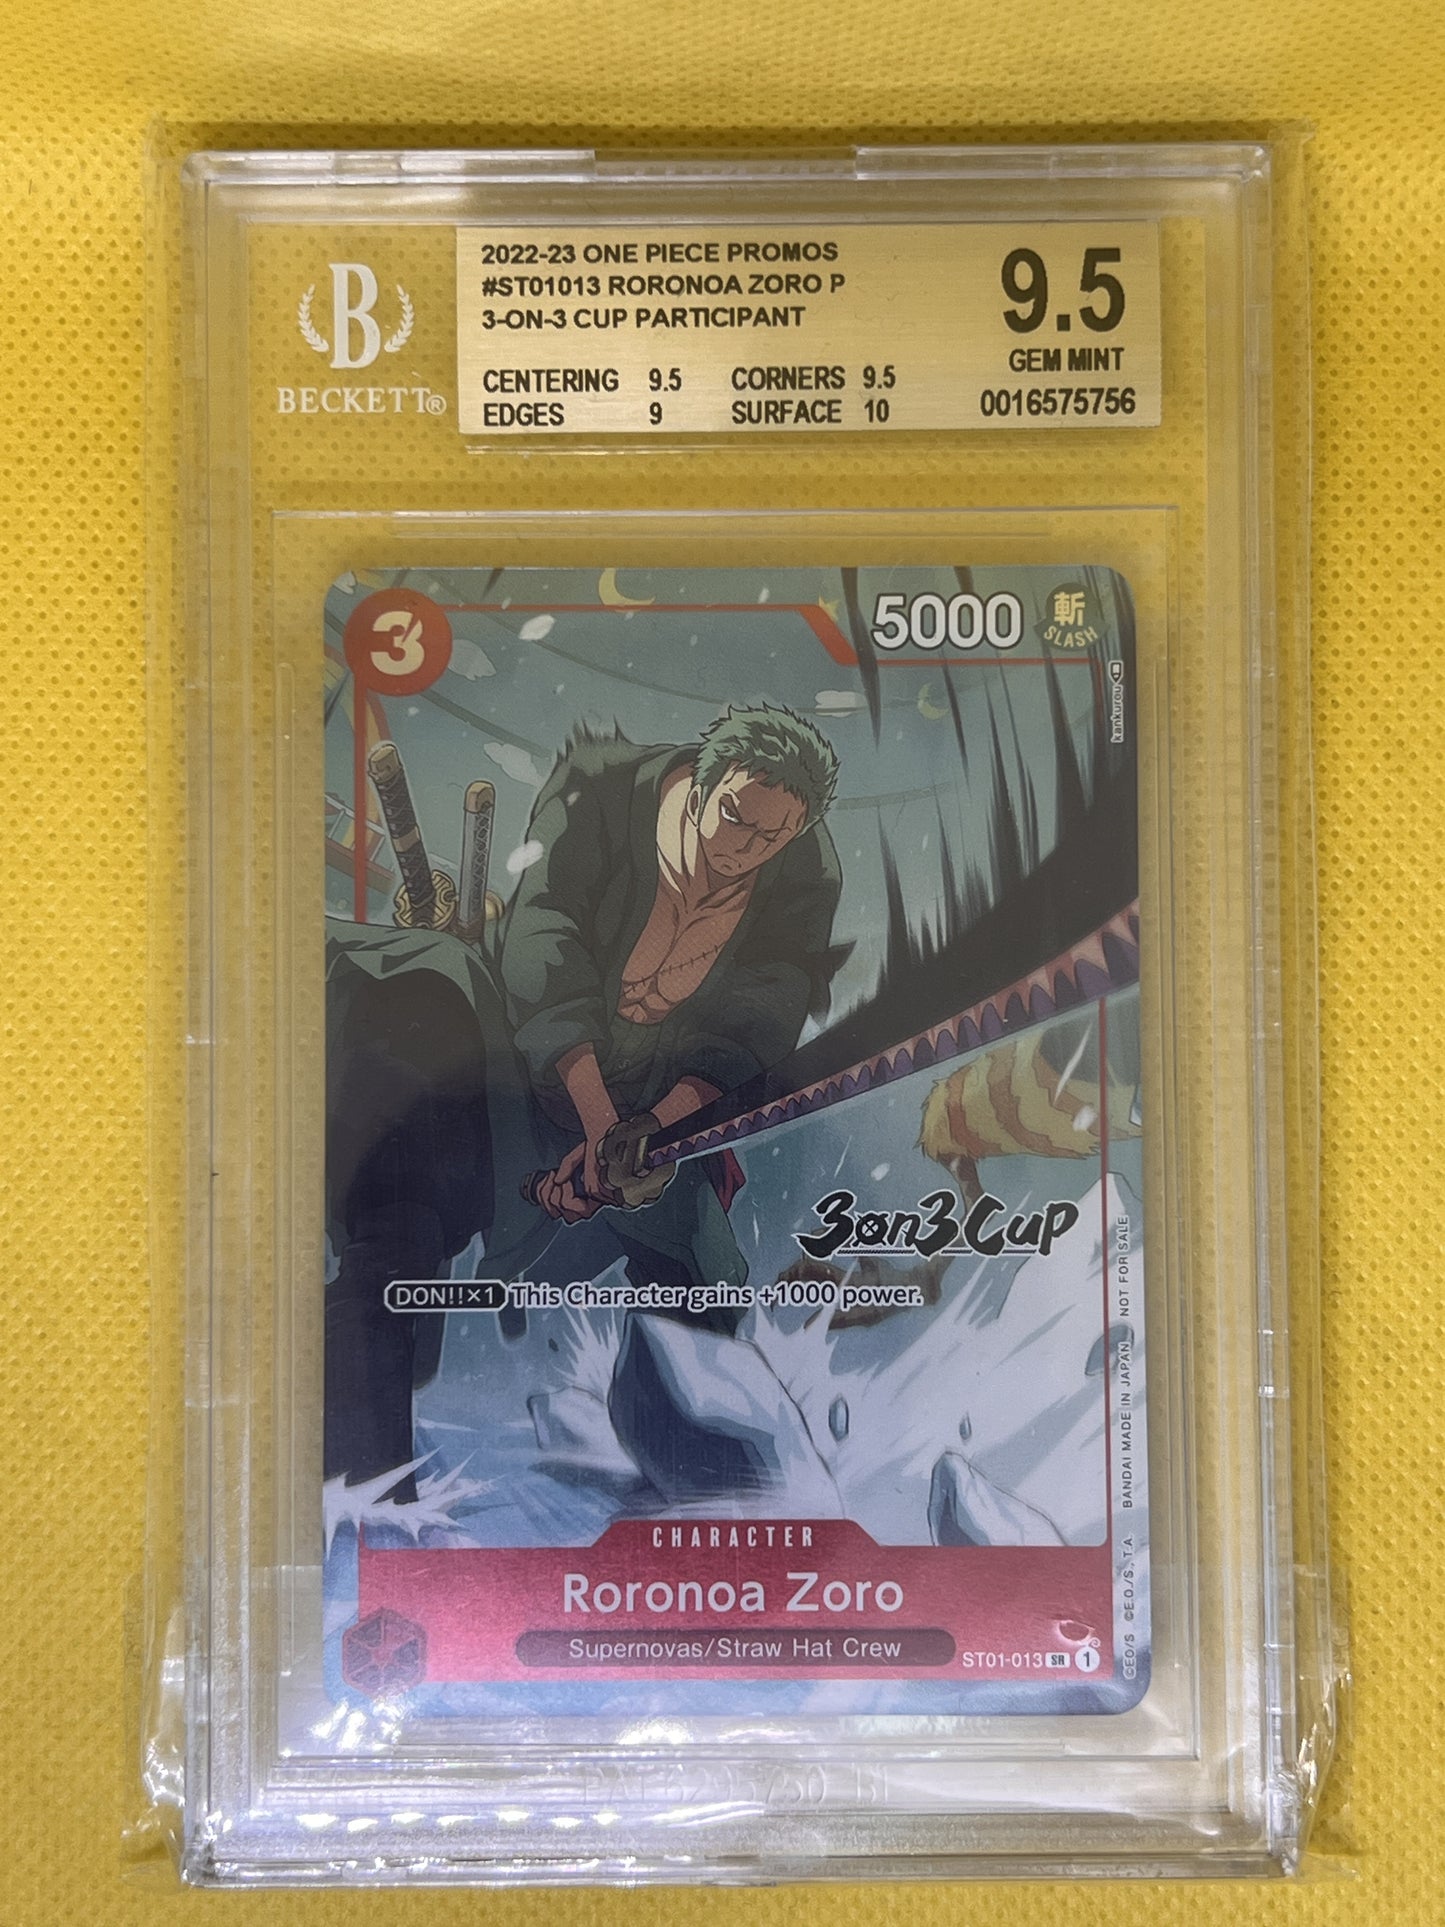 Roronoa Zoro OP01-025 3on3 Cup Top Partcipant Prizing  BGS 9.5